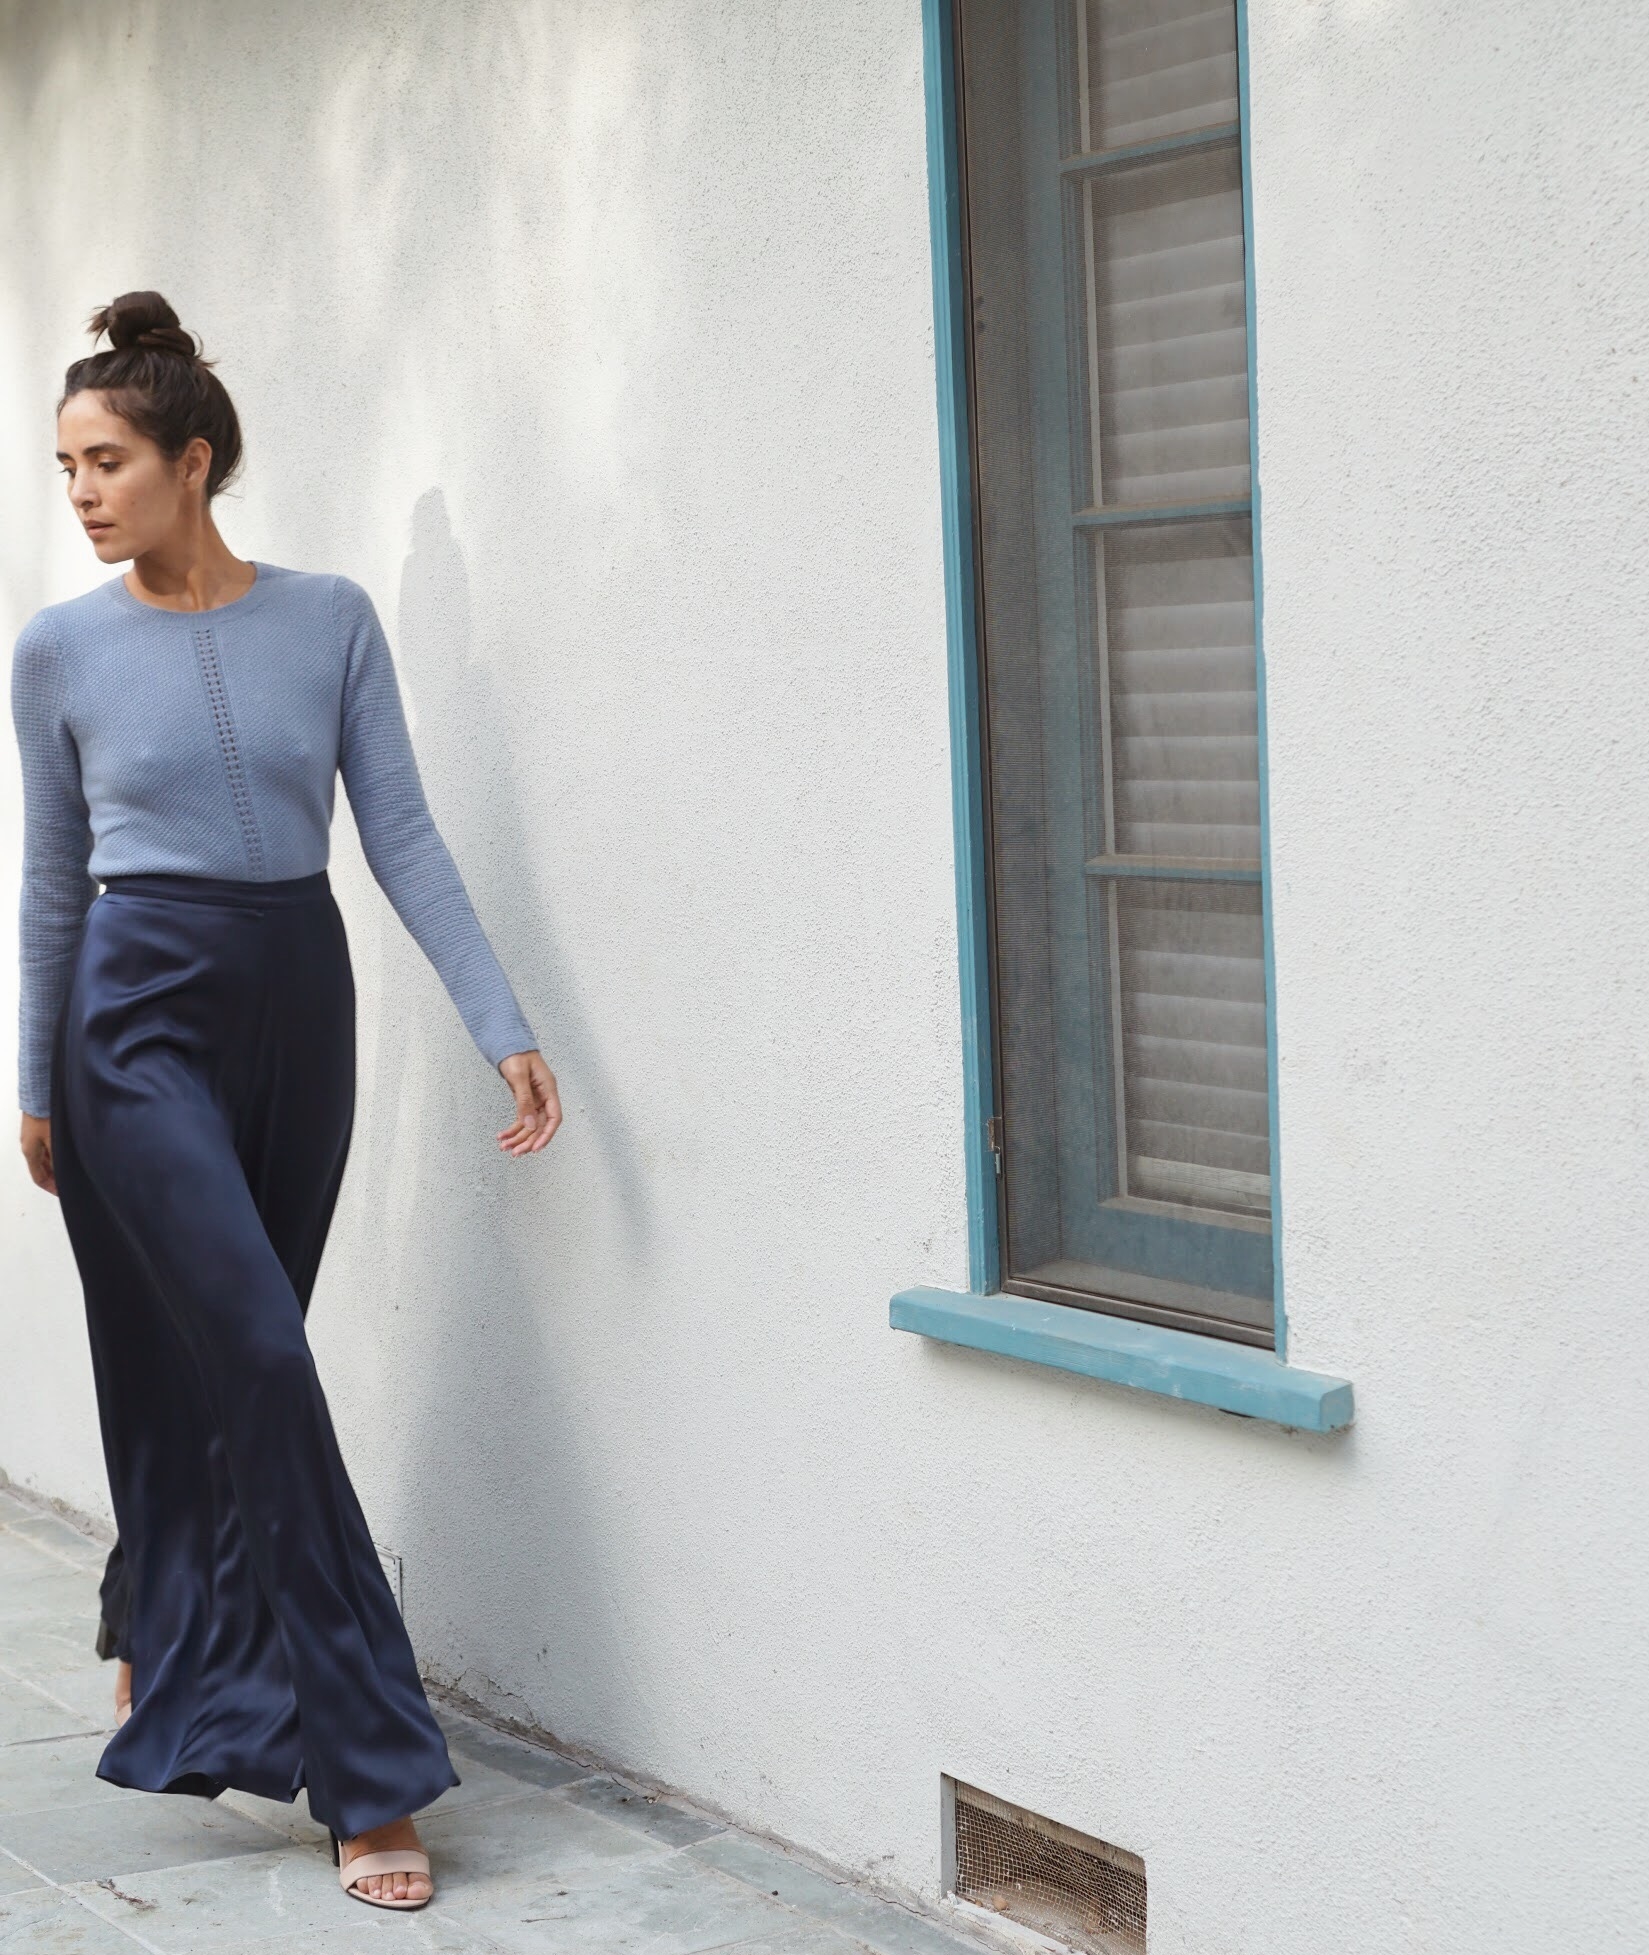   Maiyet  Crewneck Sweater in Light Blue +  Voz  Palazzo pant in Navy. 